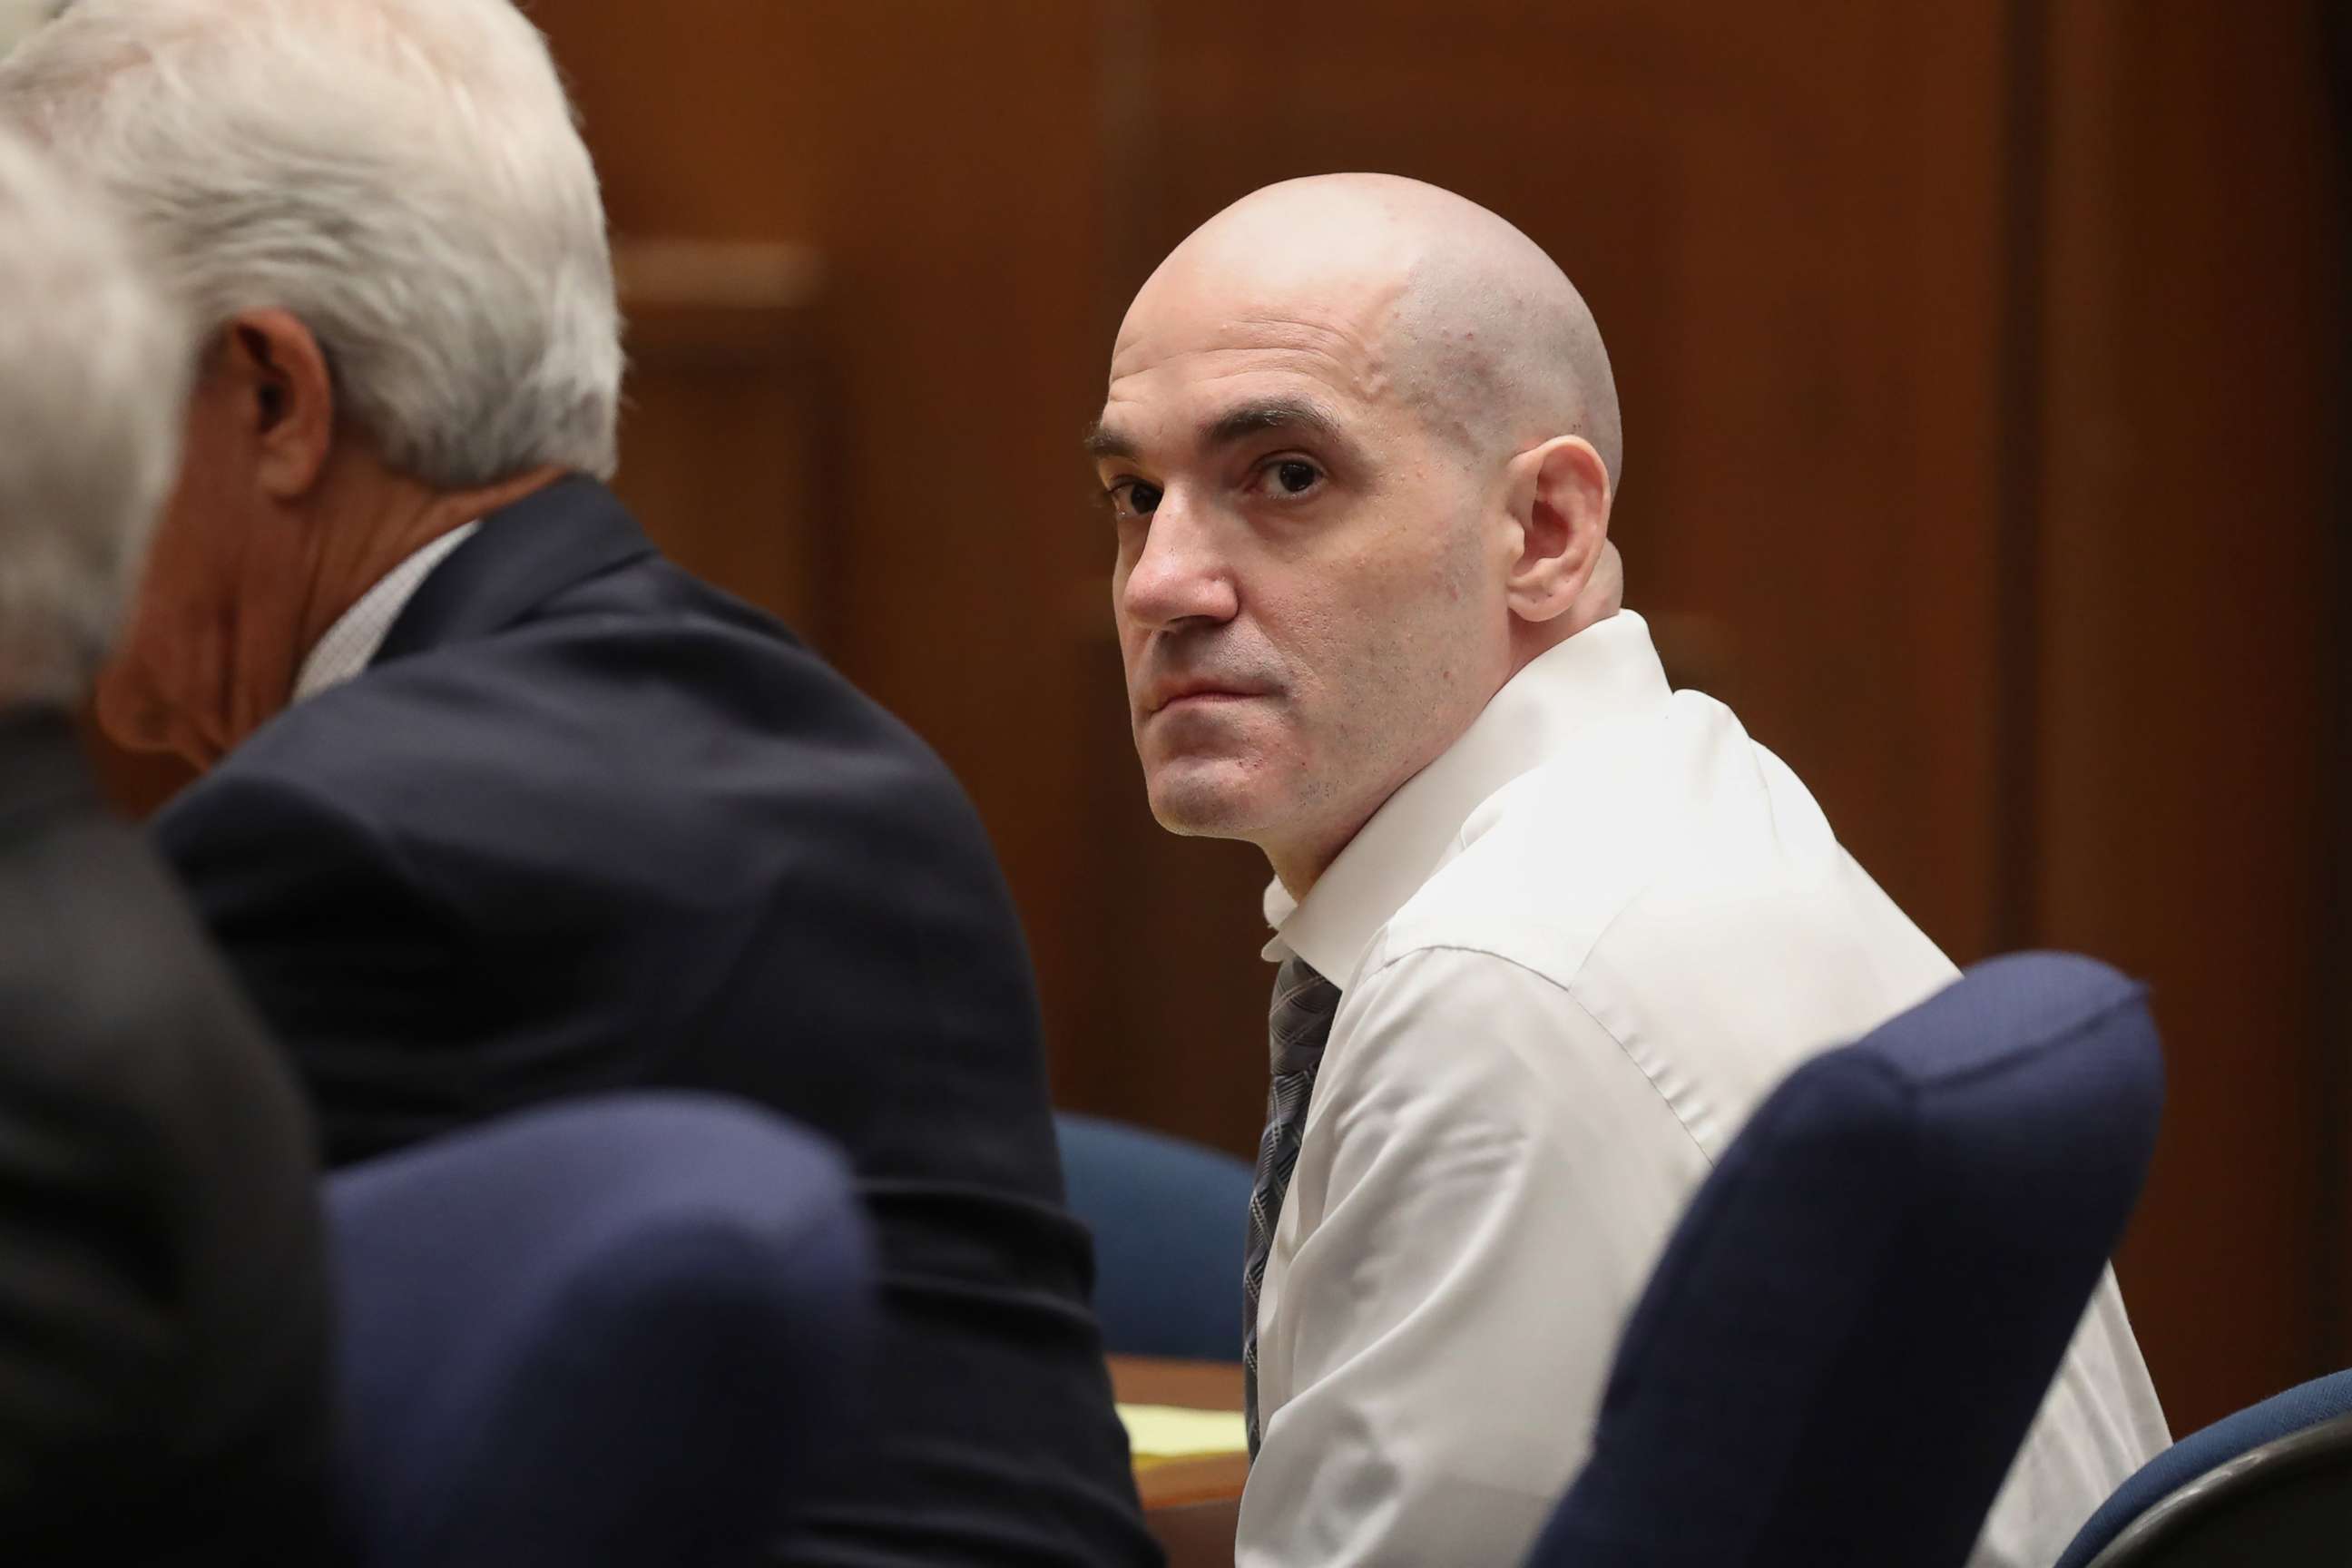 PHOTO: Michael Gargiulo listens during closing statements in his capital murder trial in Los Angeles Superior Court, Aug. 6, 2019.